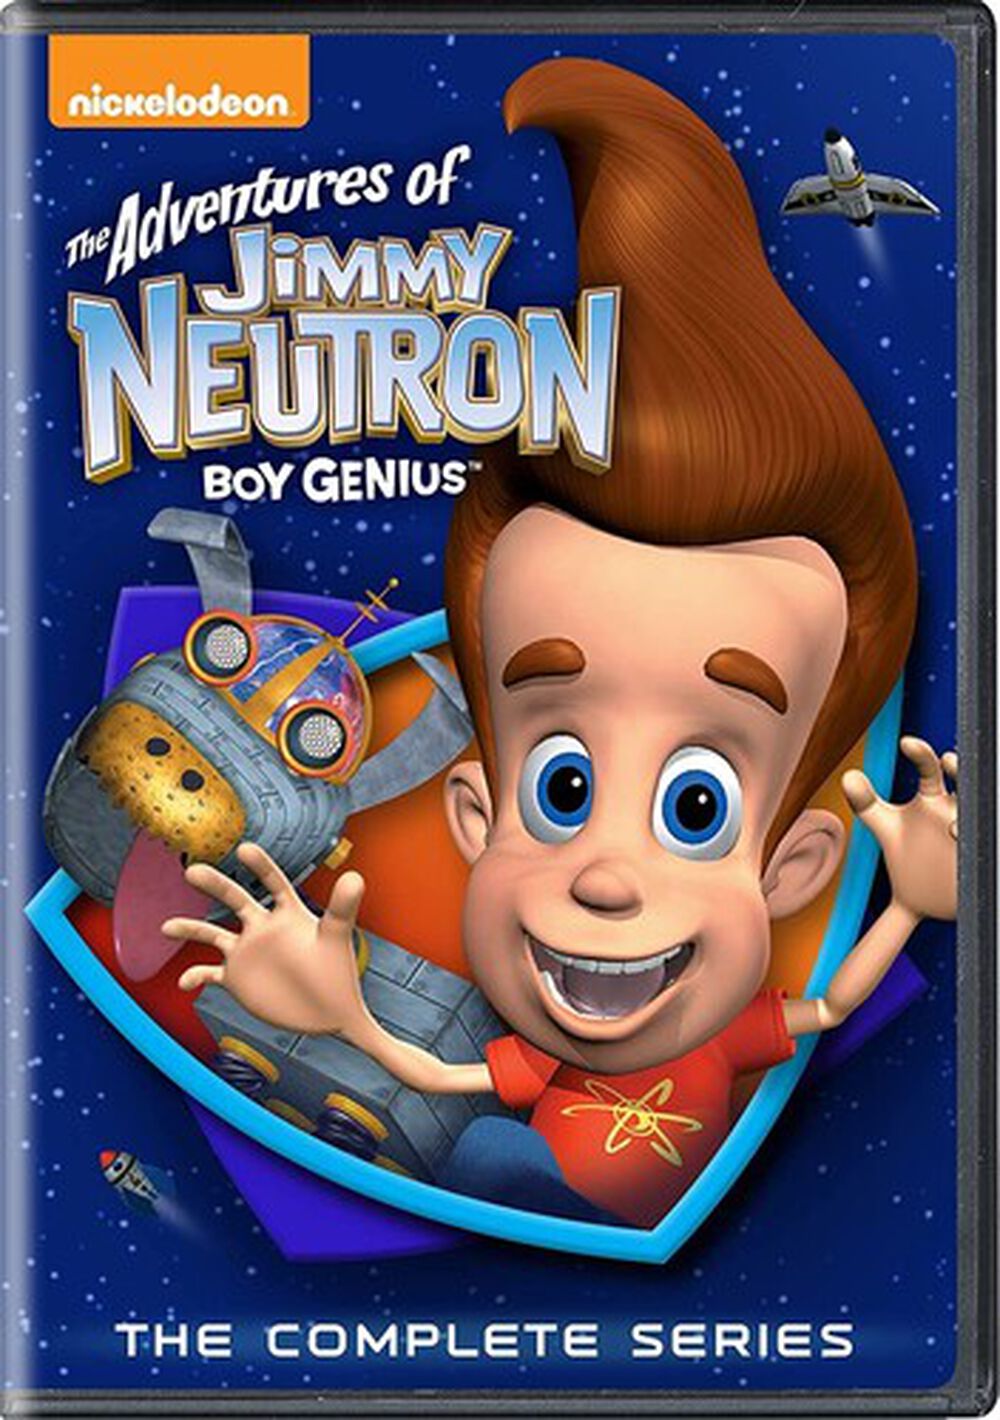 The Adventures of Jimmy Neutron, Boy Genius: The Complete Series on DVD